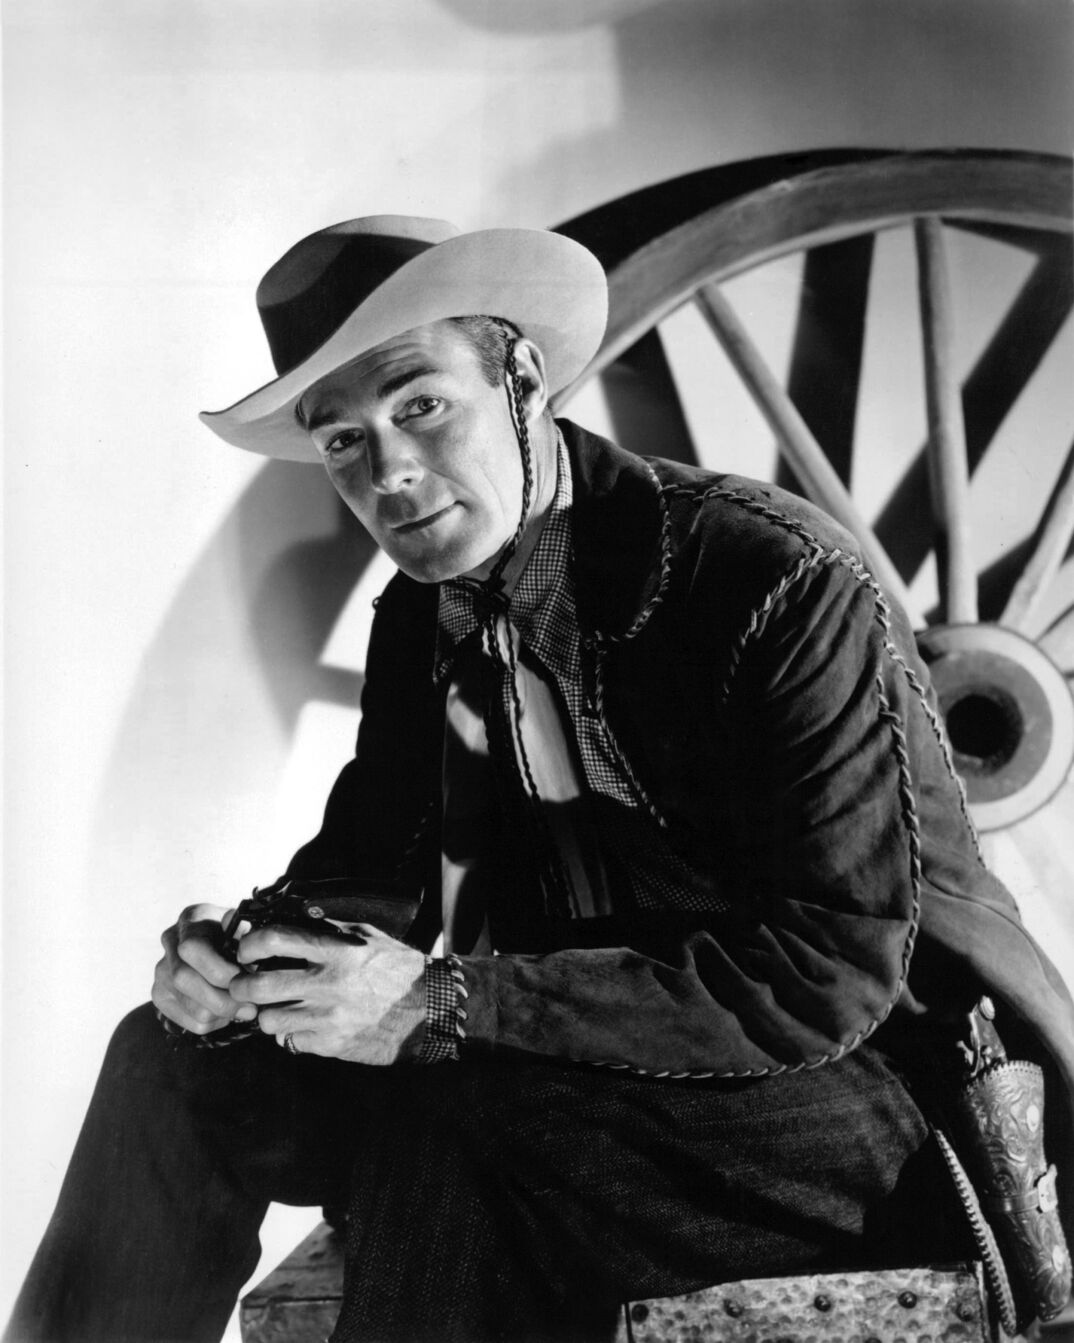 American actor Randolph Scott (1898 - 1987) in a western outfit, circa 1935. (Photo by Silver Screen Collection/Getty Images)